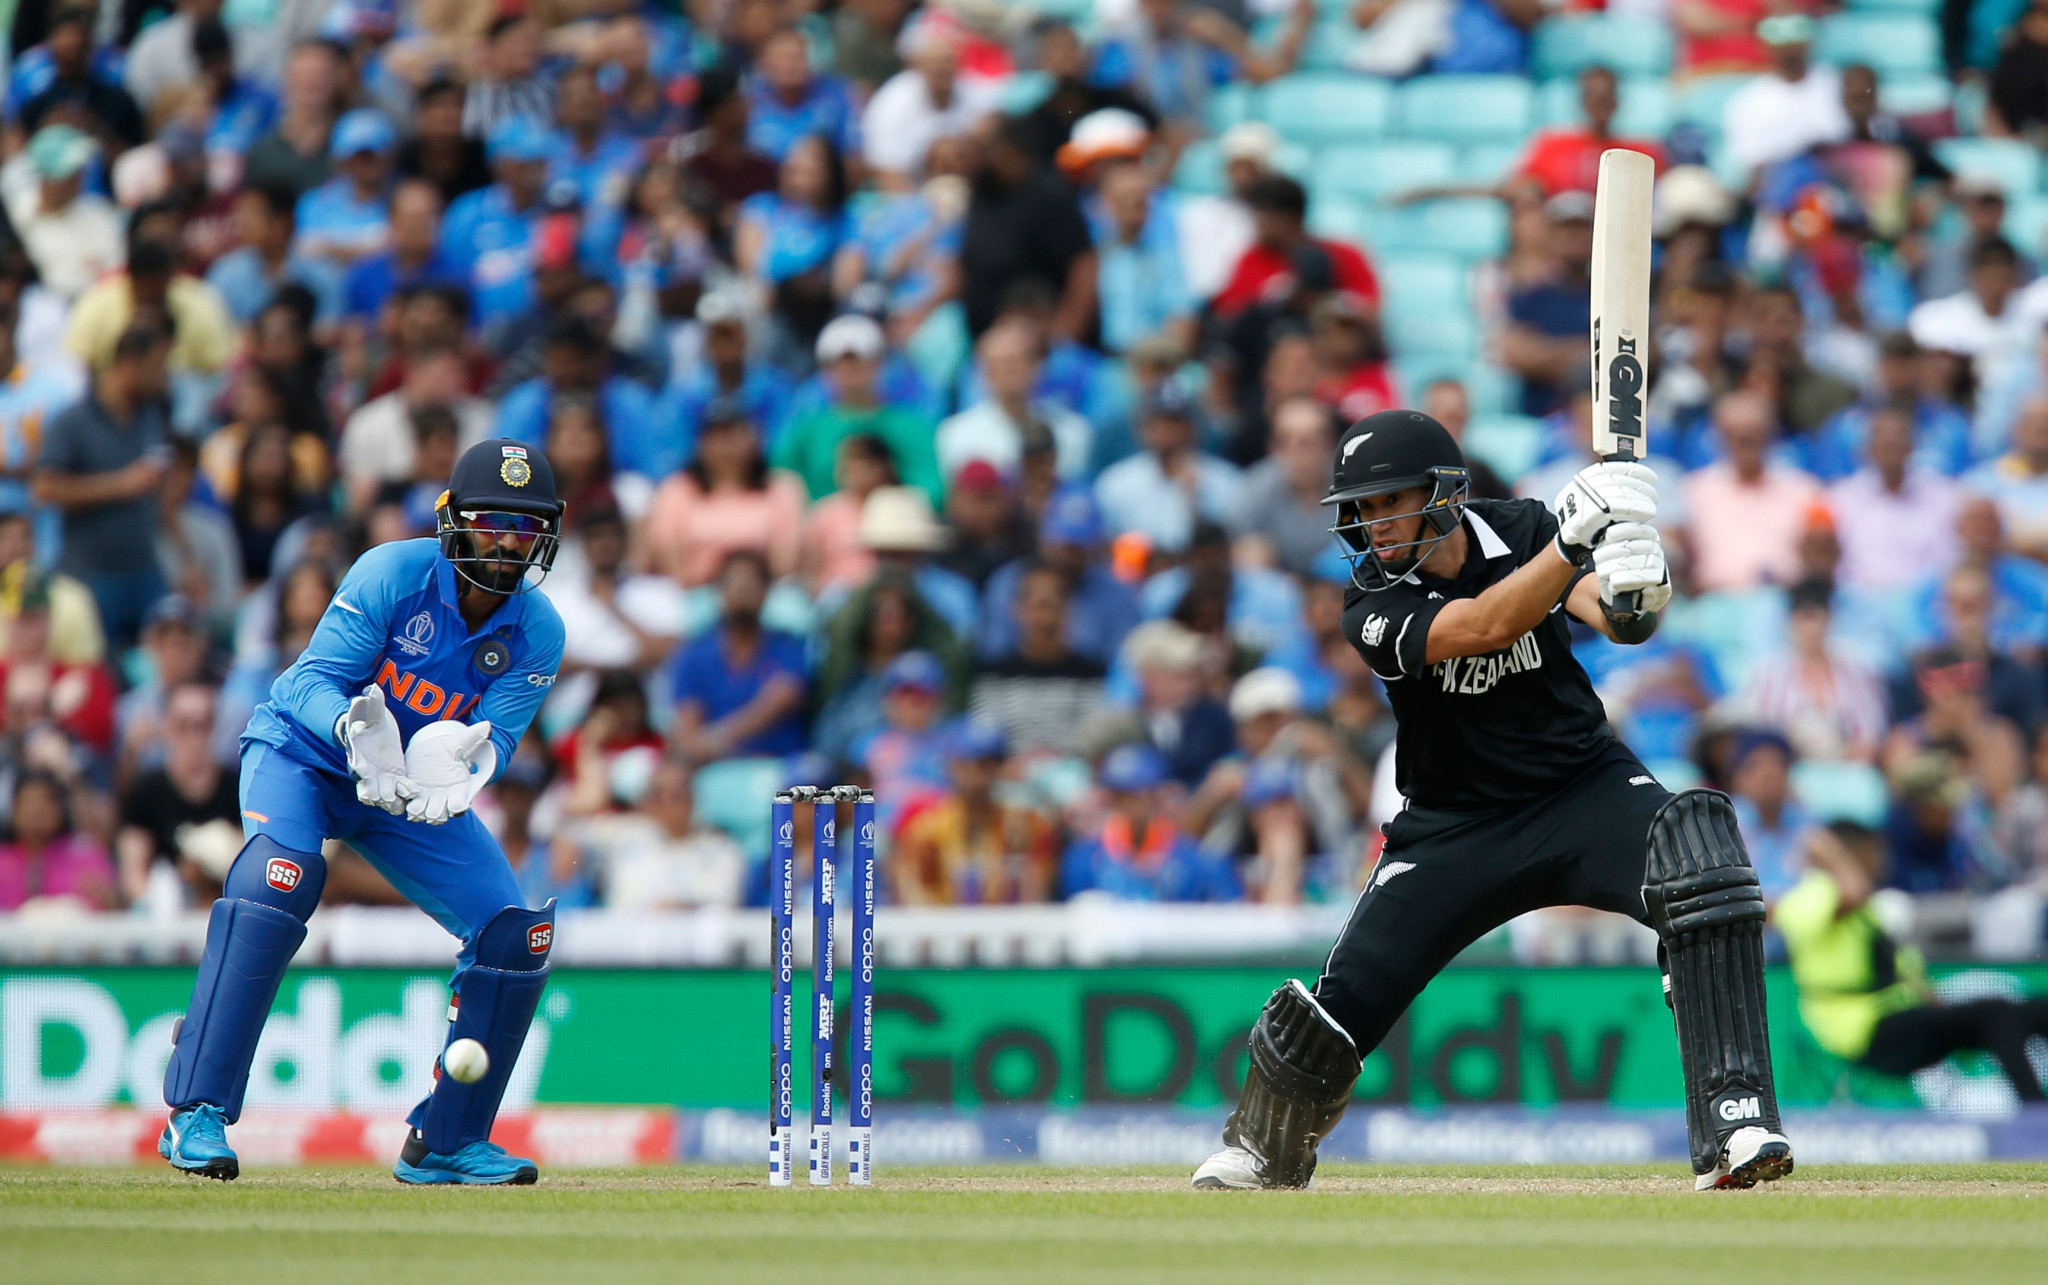 New Zealand beat India in an ICC Cricket World Cup warm-up game ©Getty Images